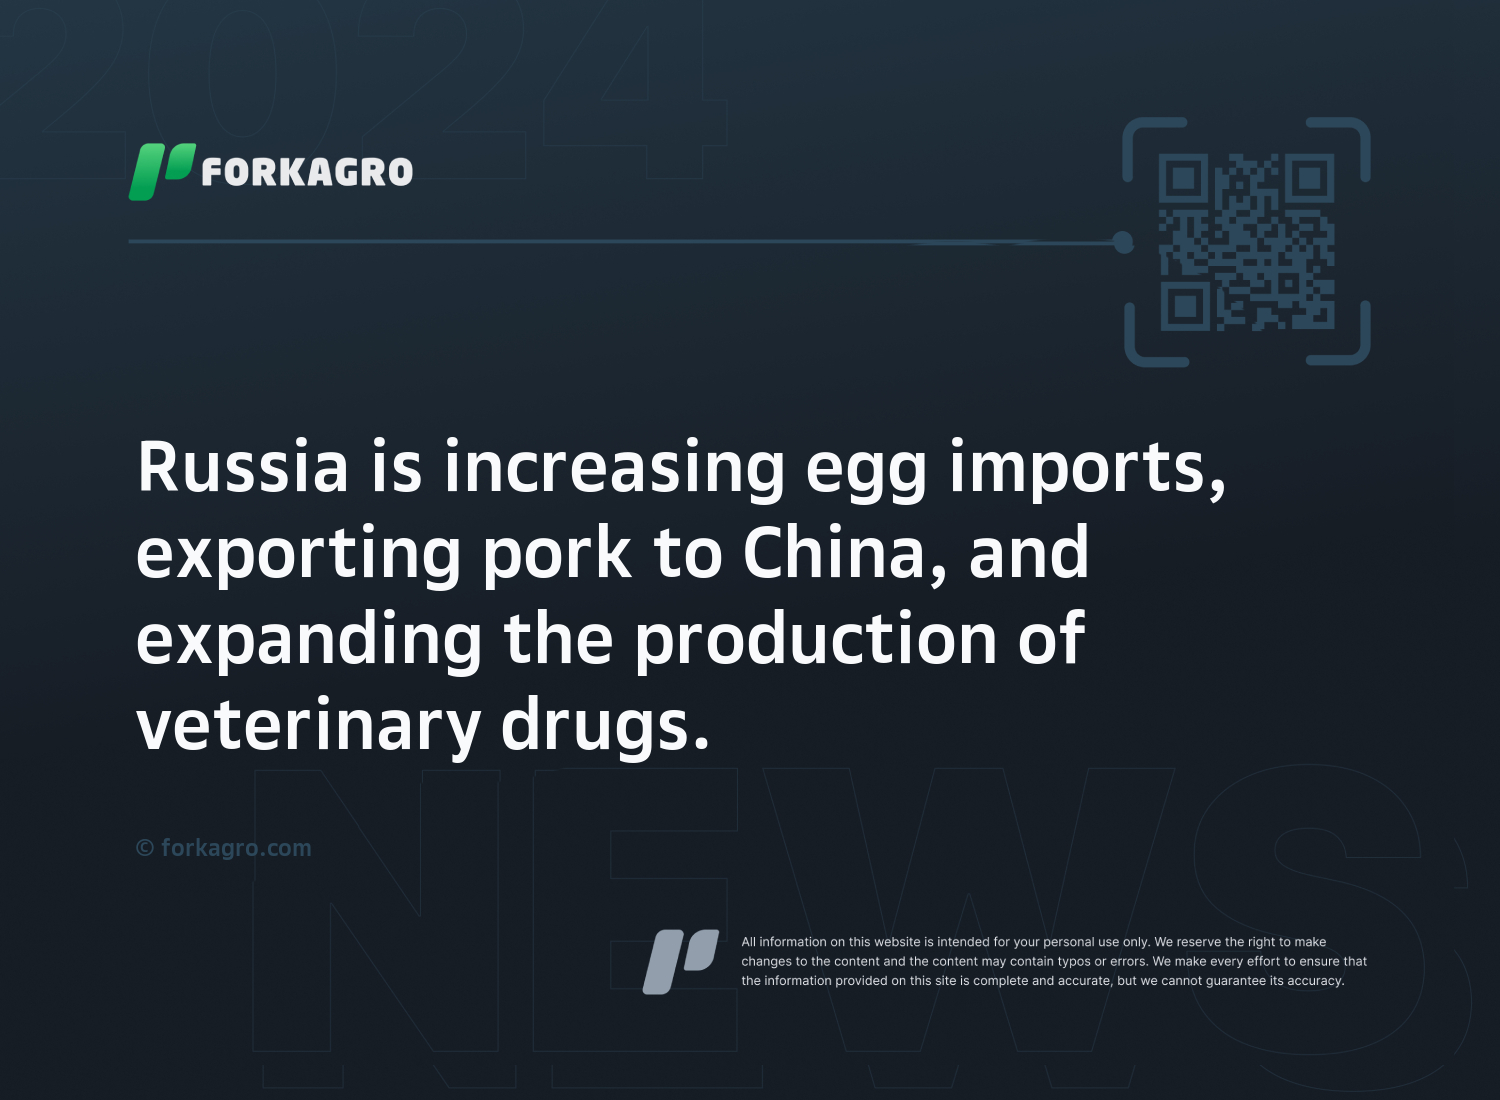 Russia is increasing egg imports, exporting pork to China, and expanding the production of veterinary drugs.